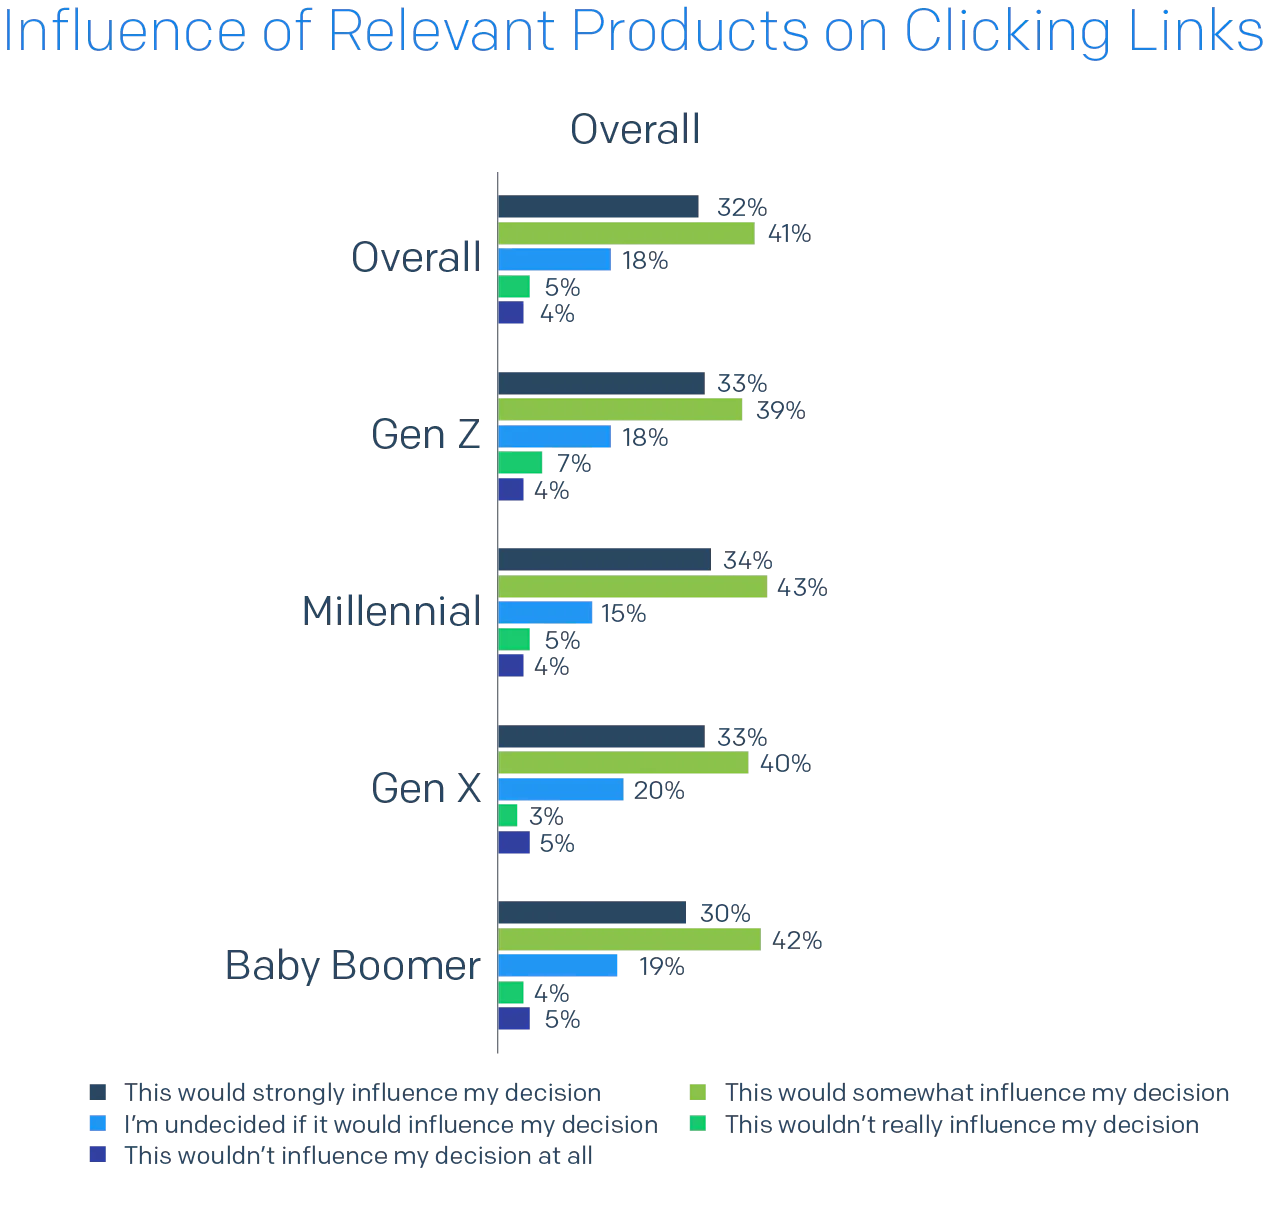 Bar chart of Influence of Relevant Products on Clicking Links